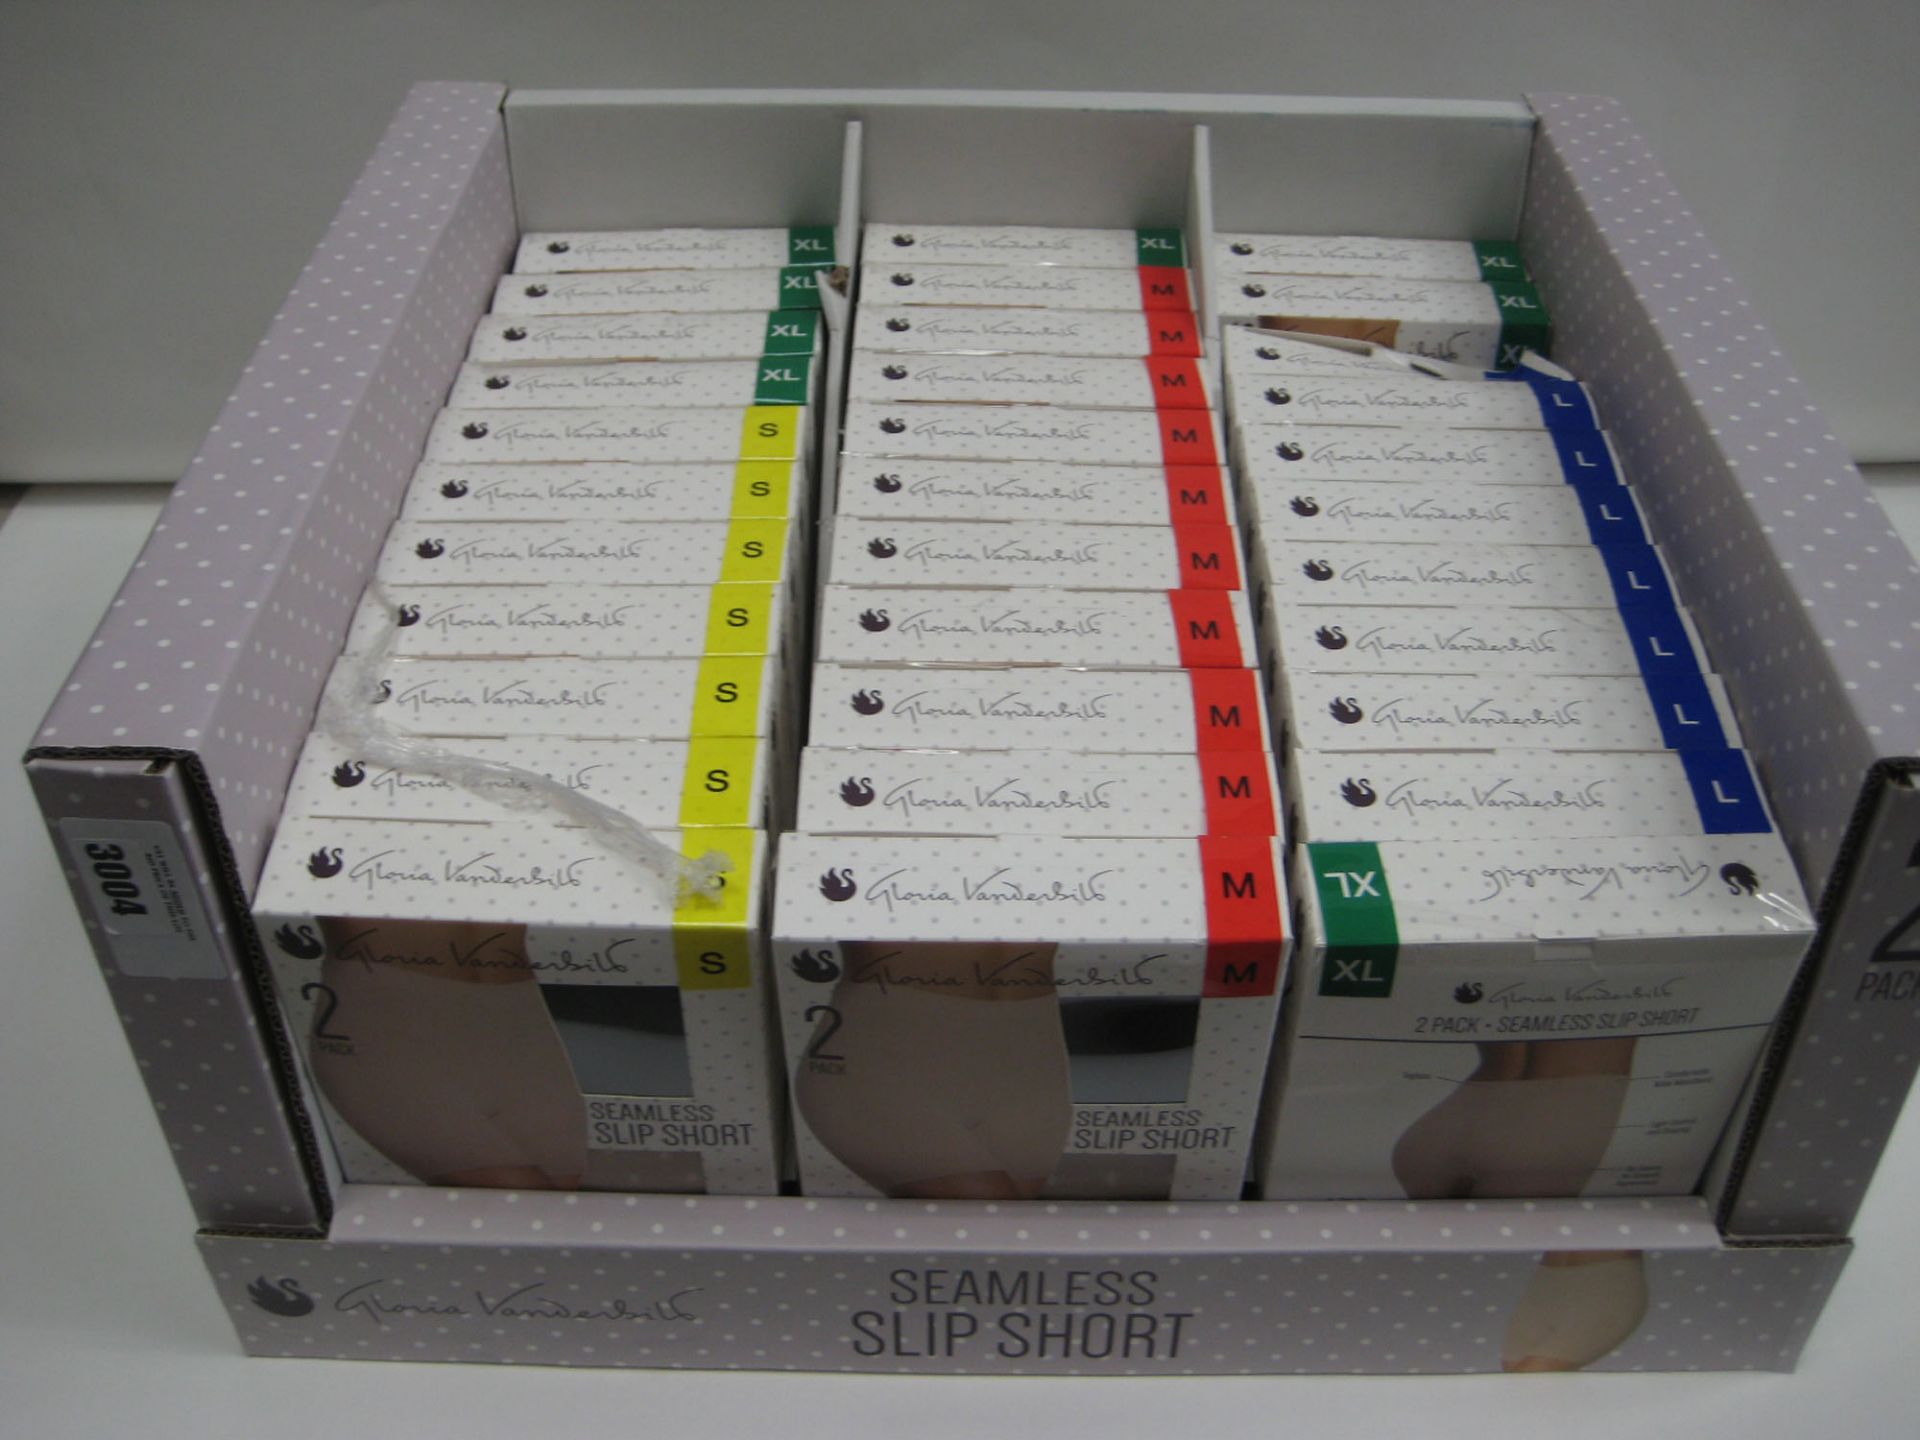 Box containing a qty of seamless slip shorts by Loreal Vanderbilt sizes S to XL